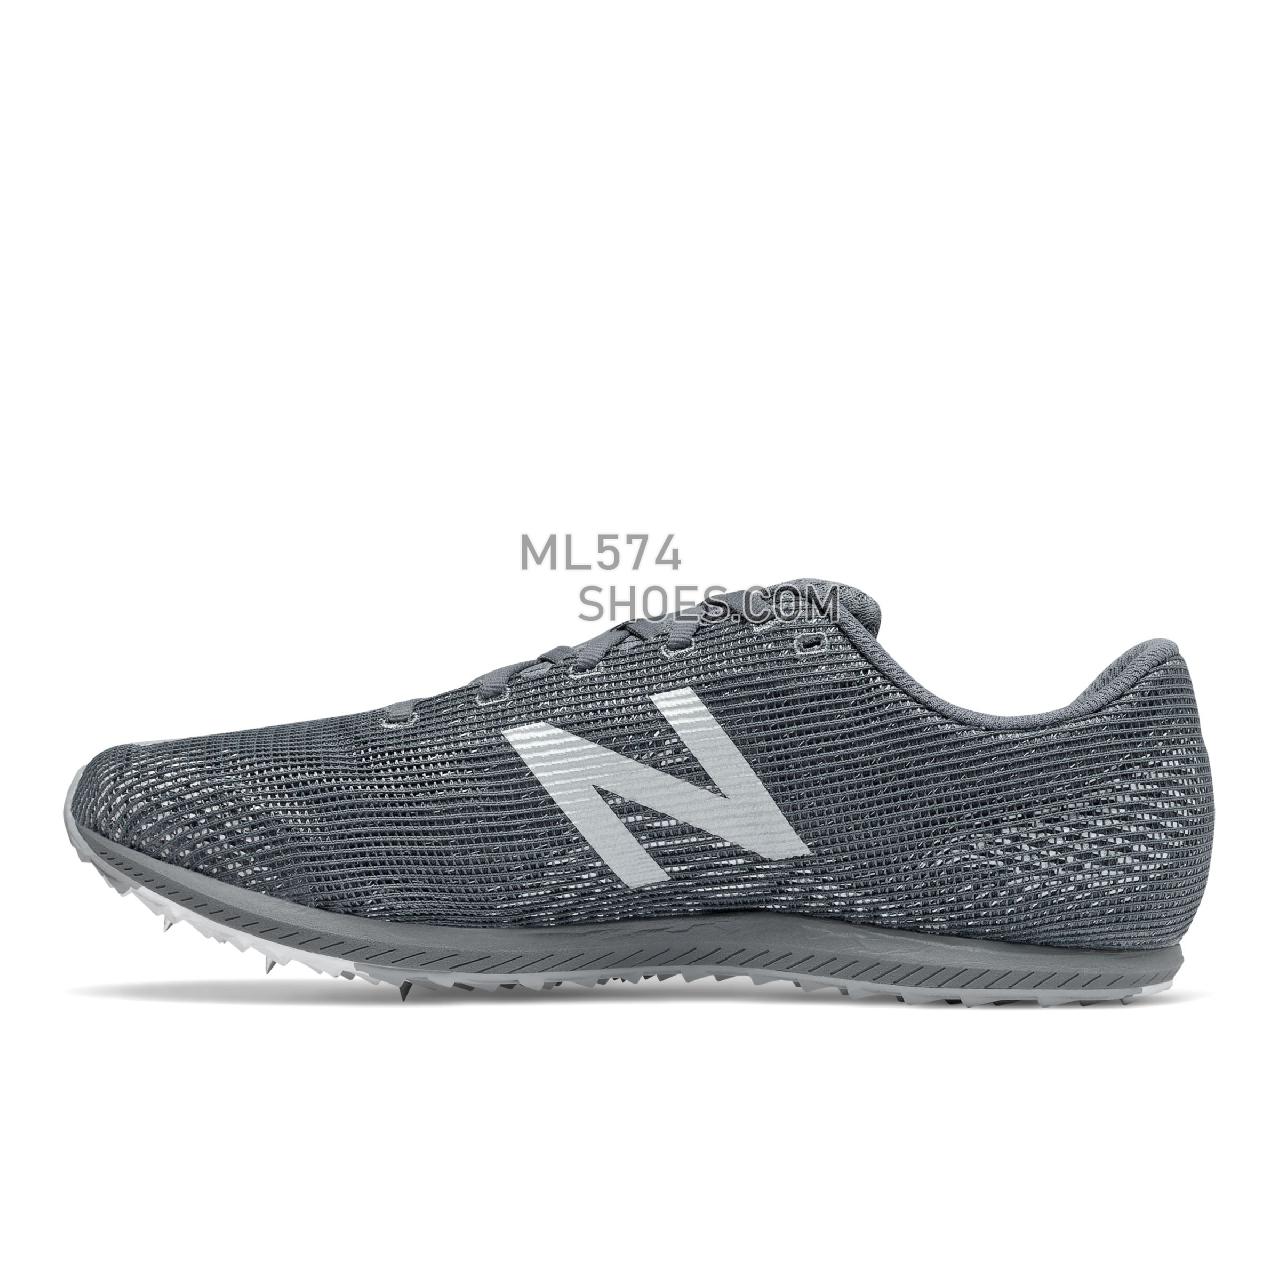 New Balance XC Seven v3 - Unisex Men's Women's Competition Running - Lead with Silver Metallic - UXCS7GS3